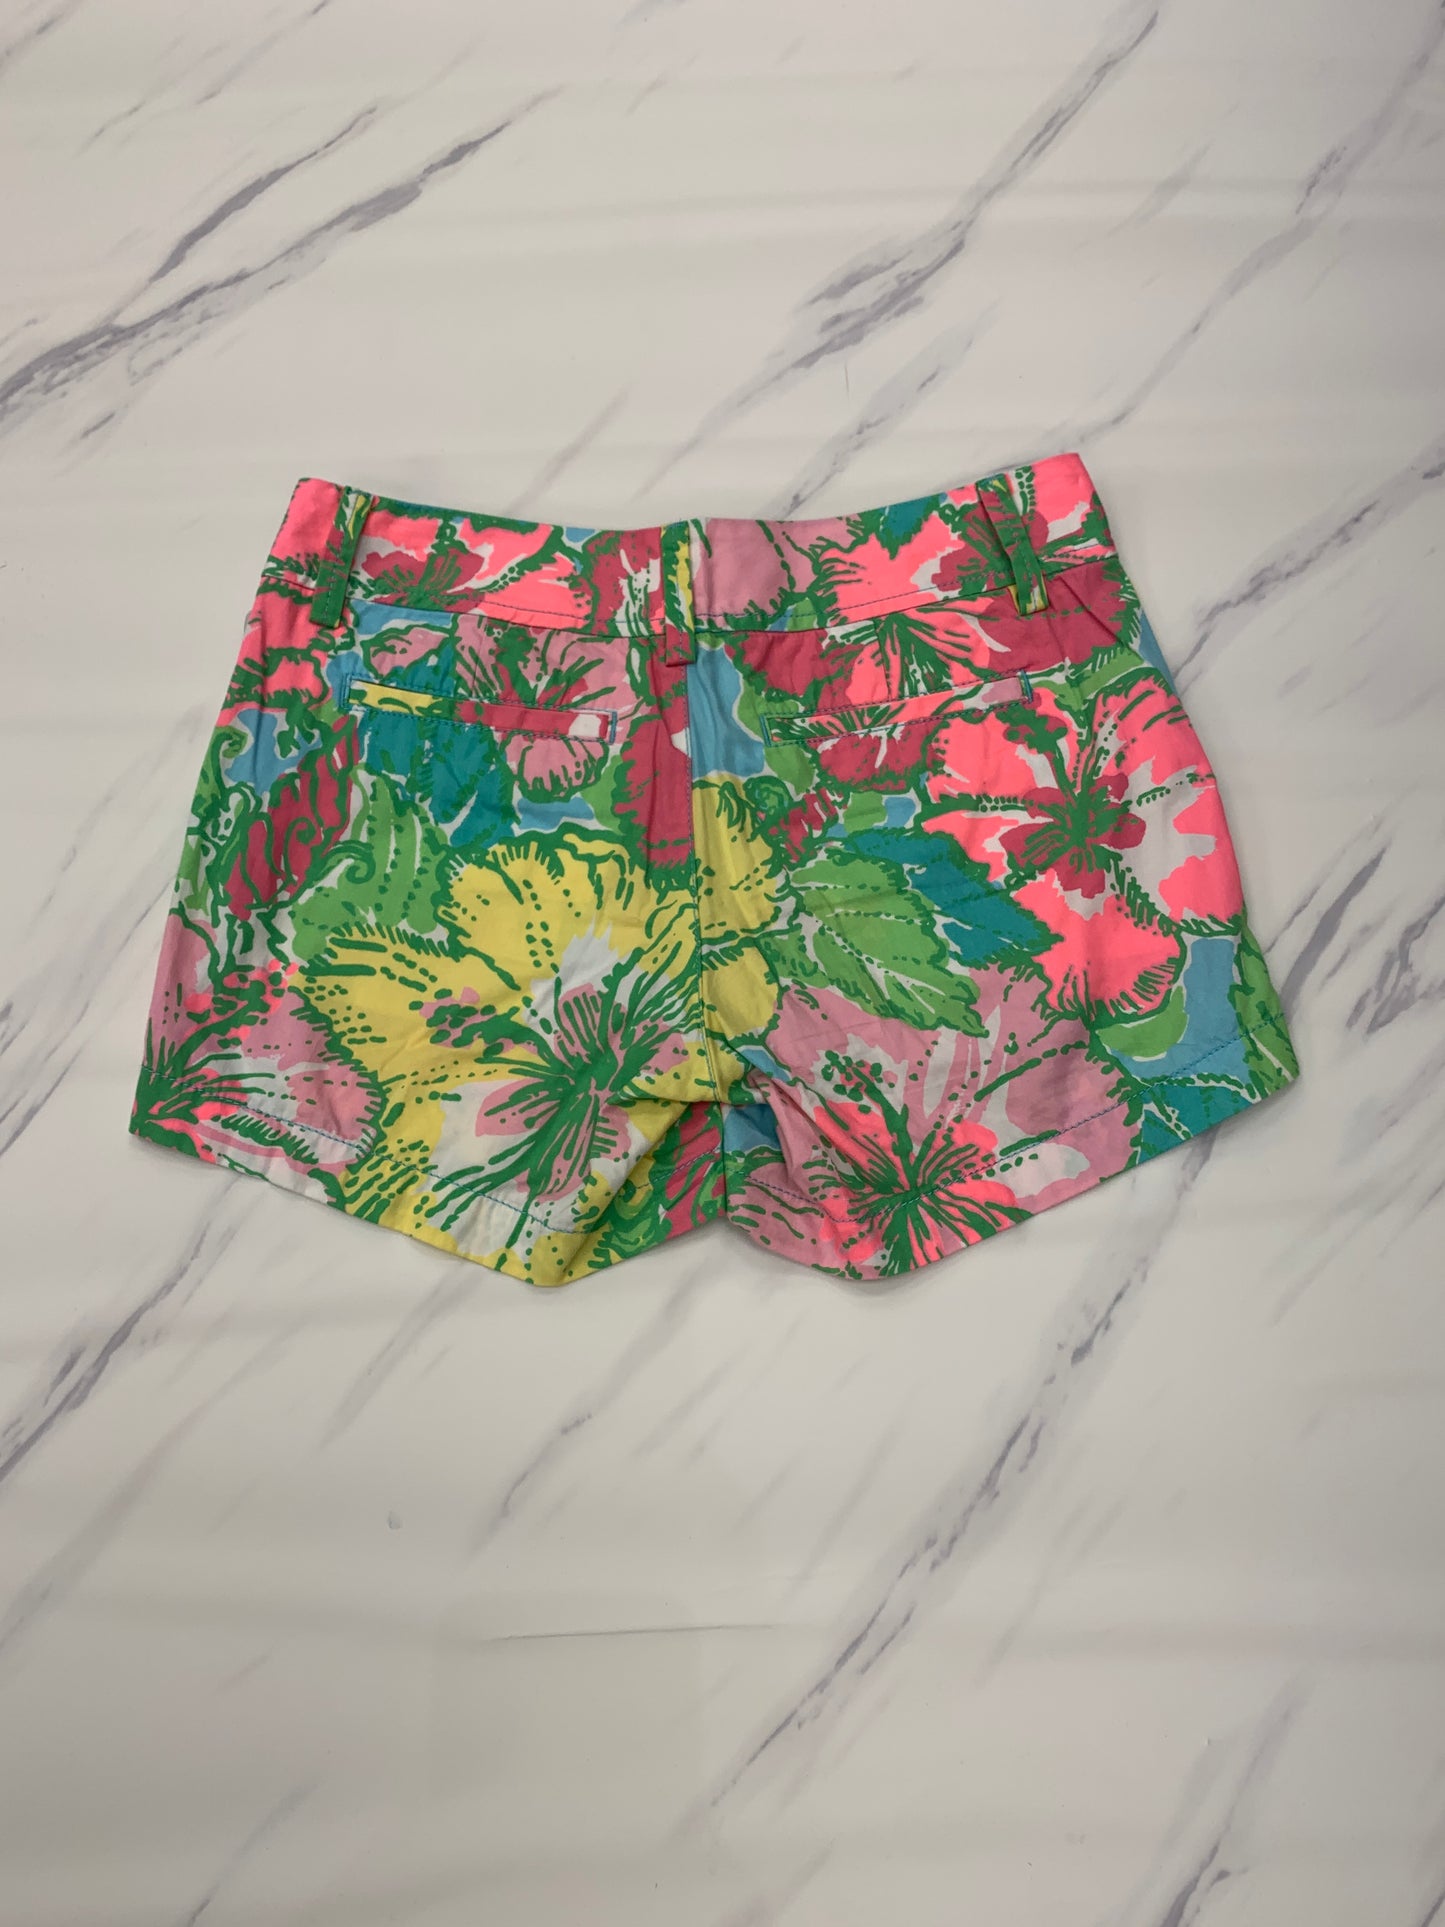 Shorts By Lilly Pulitzer  Size: 0r